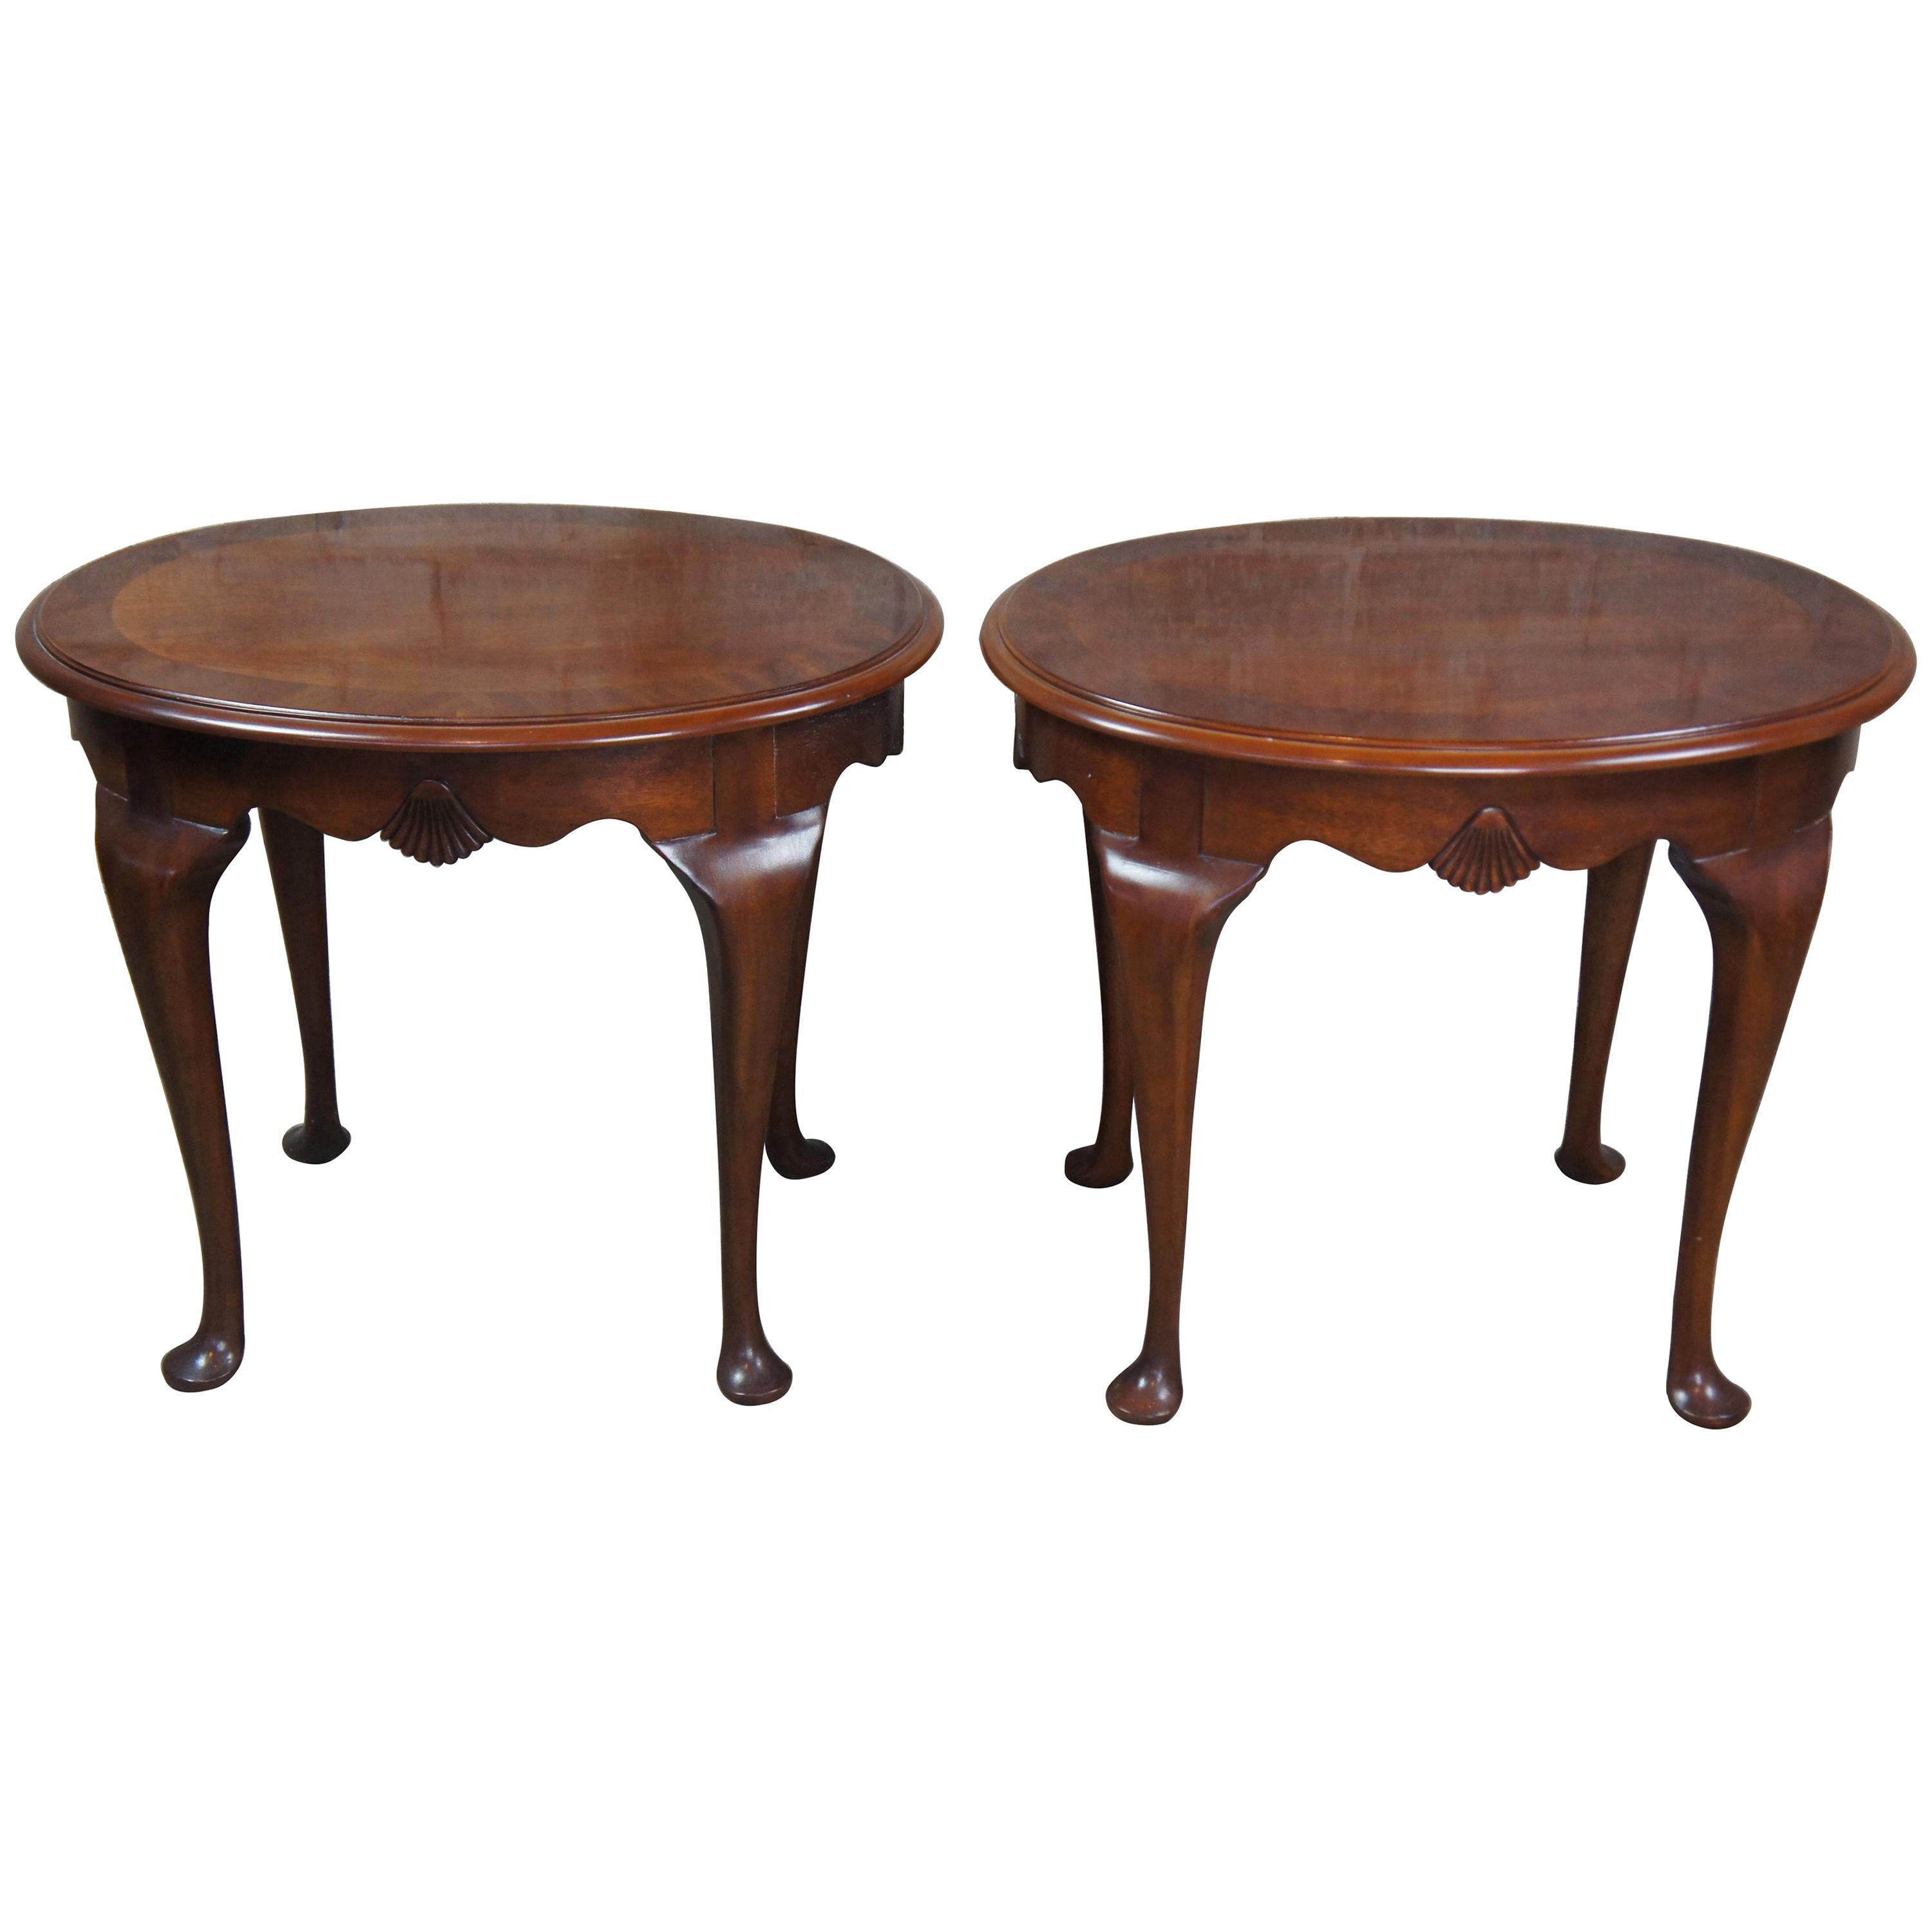 Drexel 18th Century Mahogany Queen Anne Scalloped Oval Accent Tables 138-306